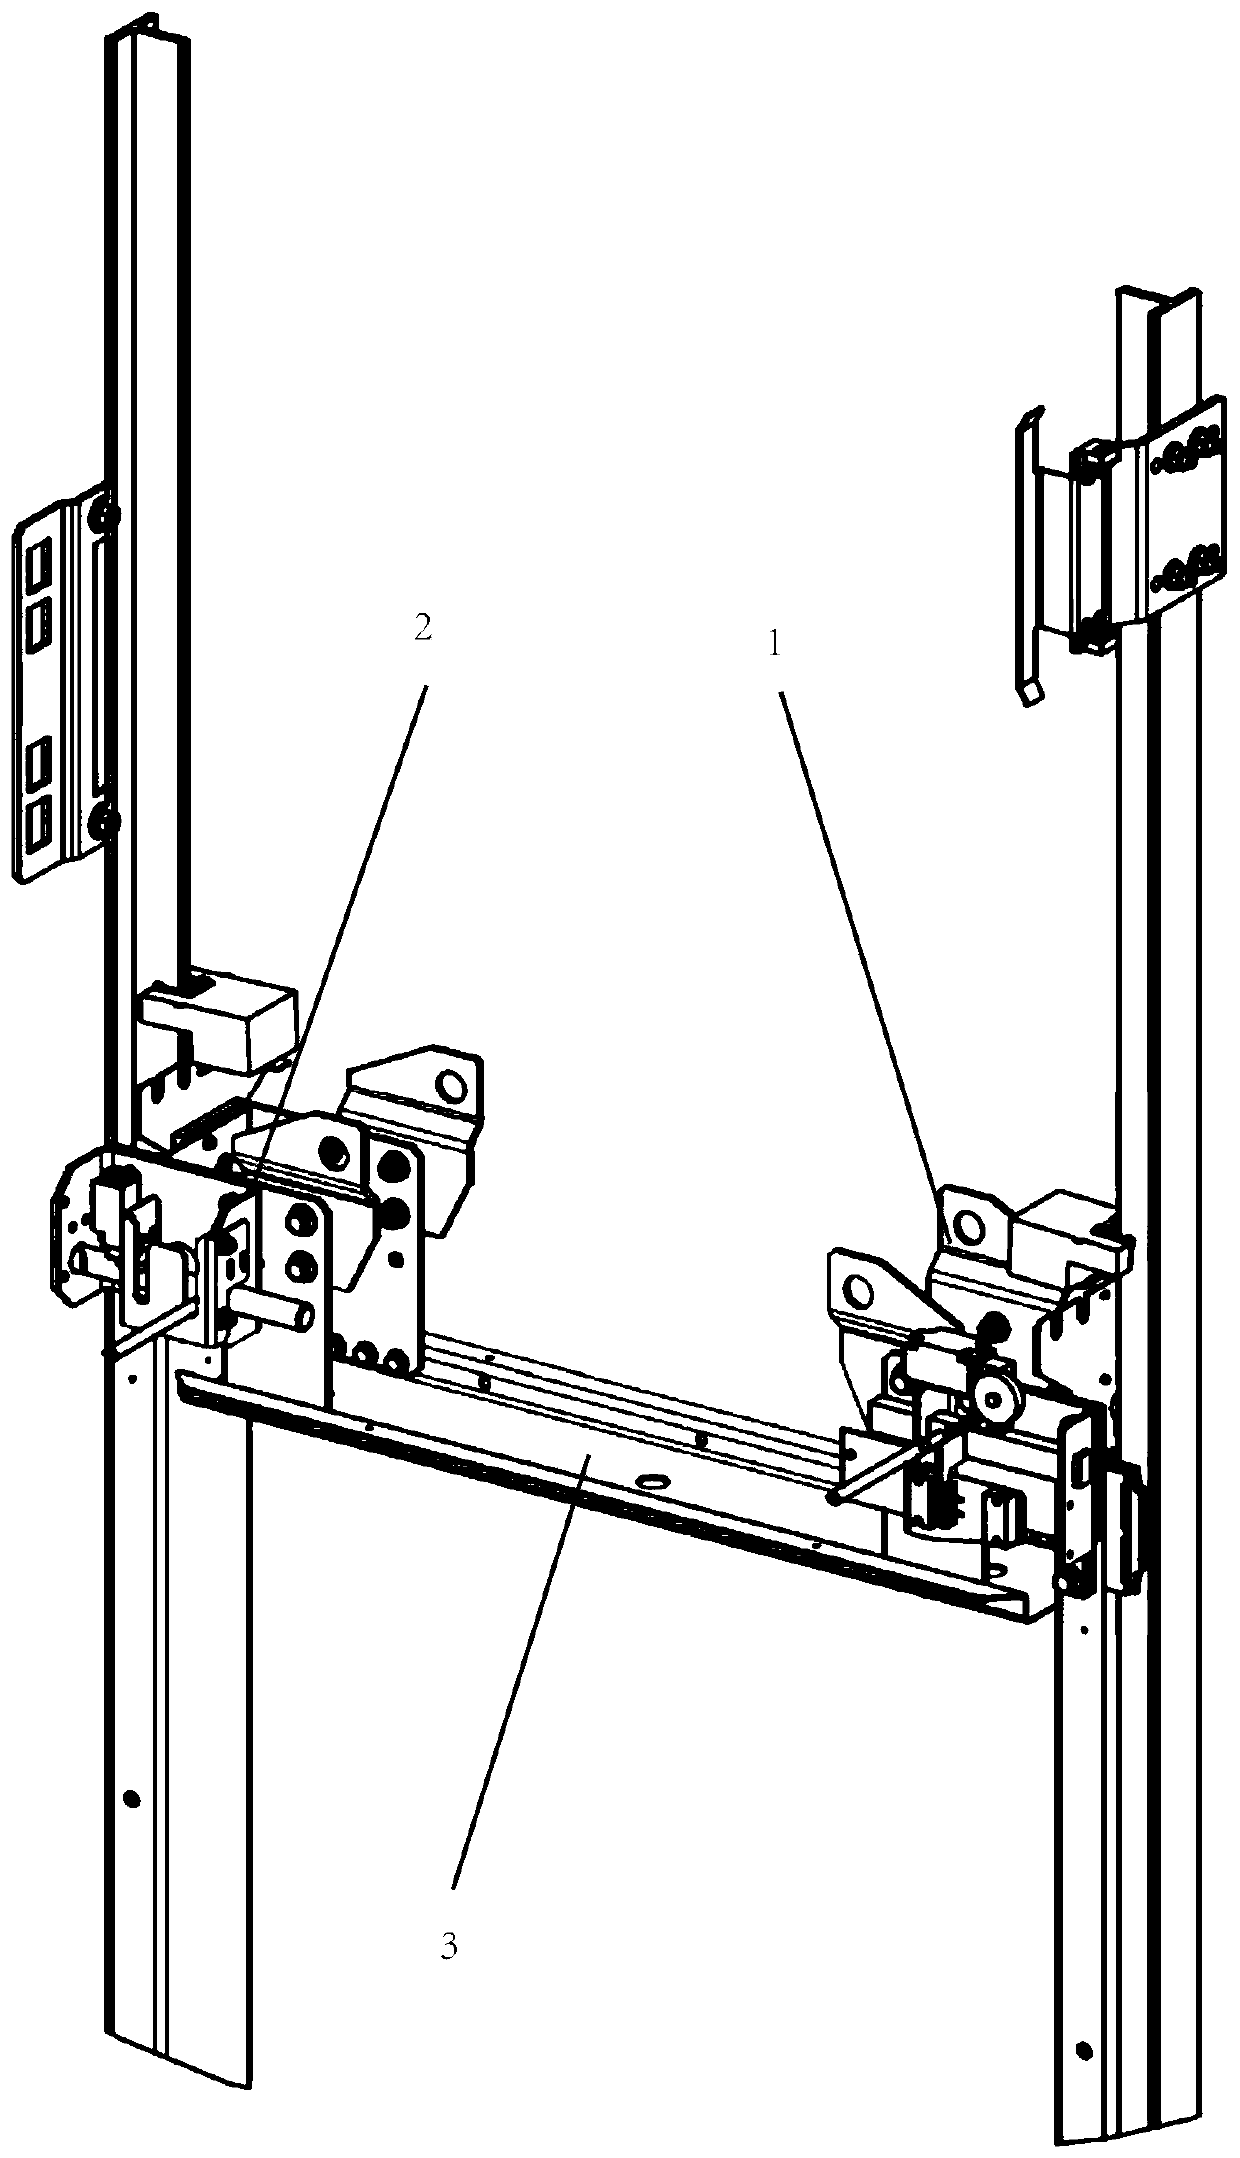 Integral type stopping-locking safety device and elevator system